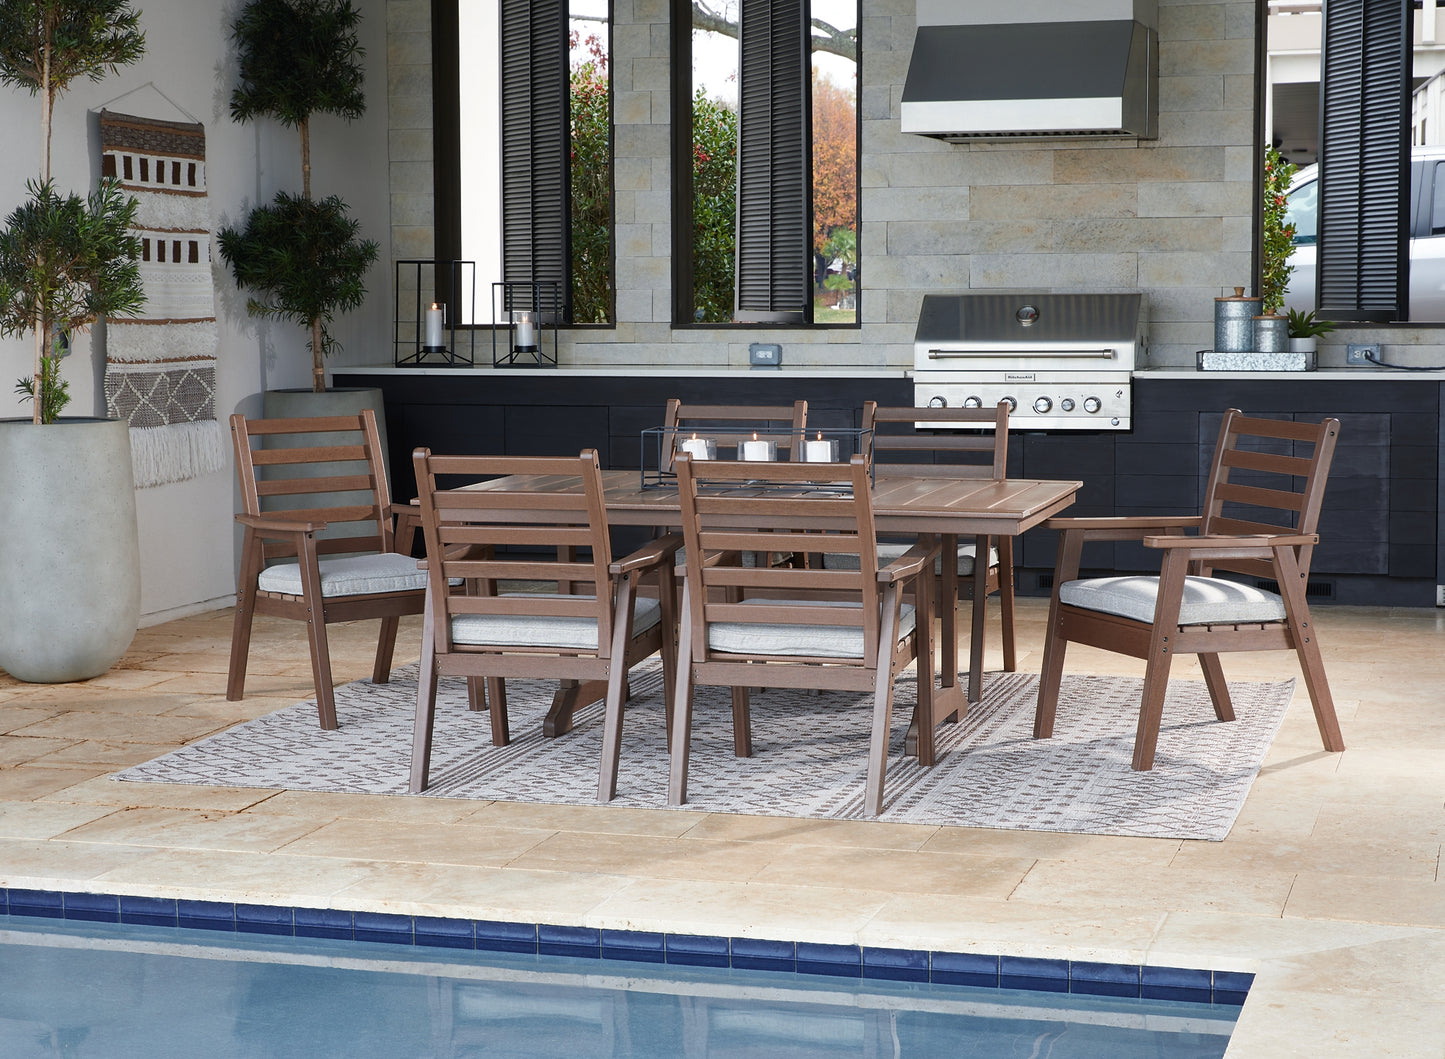 Emmeline Outdoor Dining Table and 6 Chairs